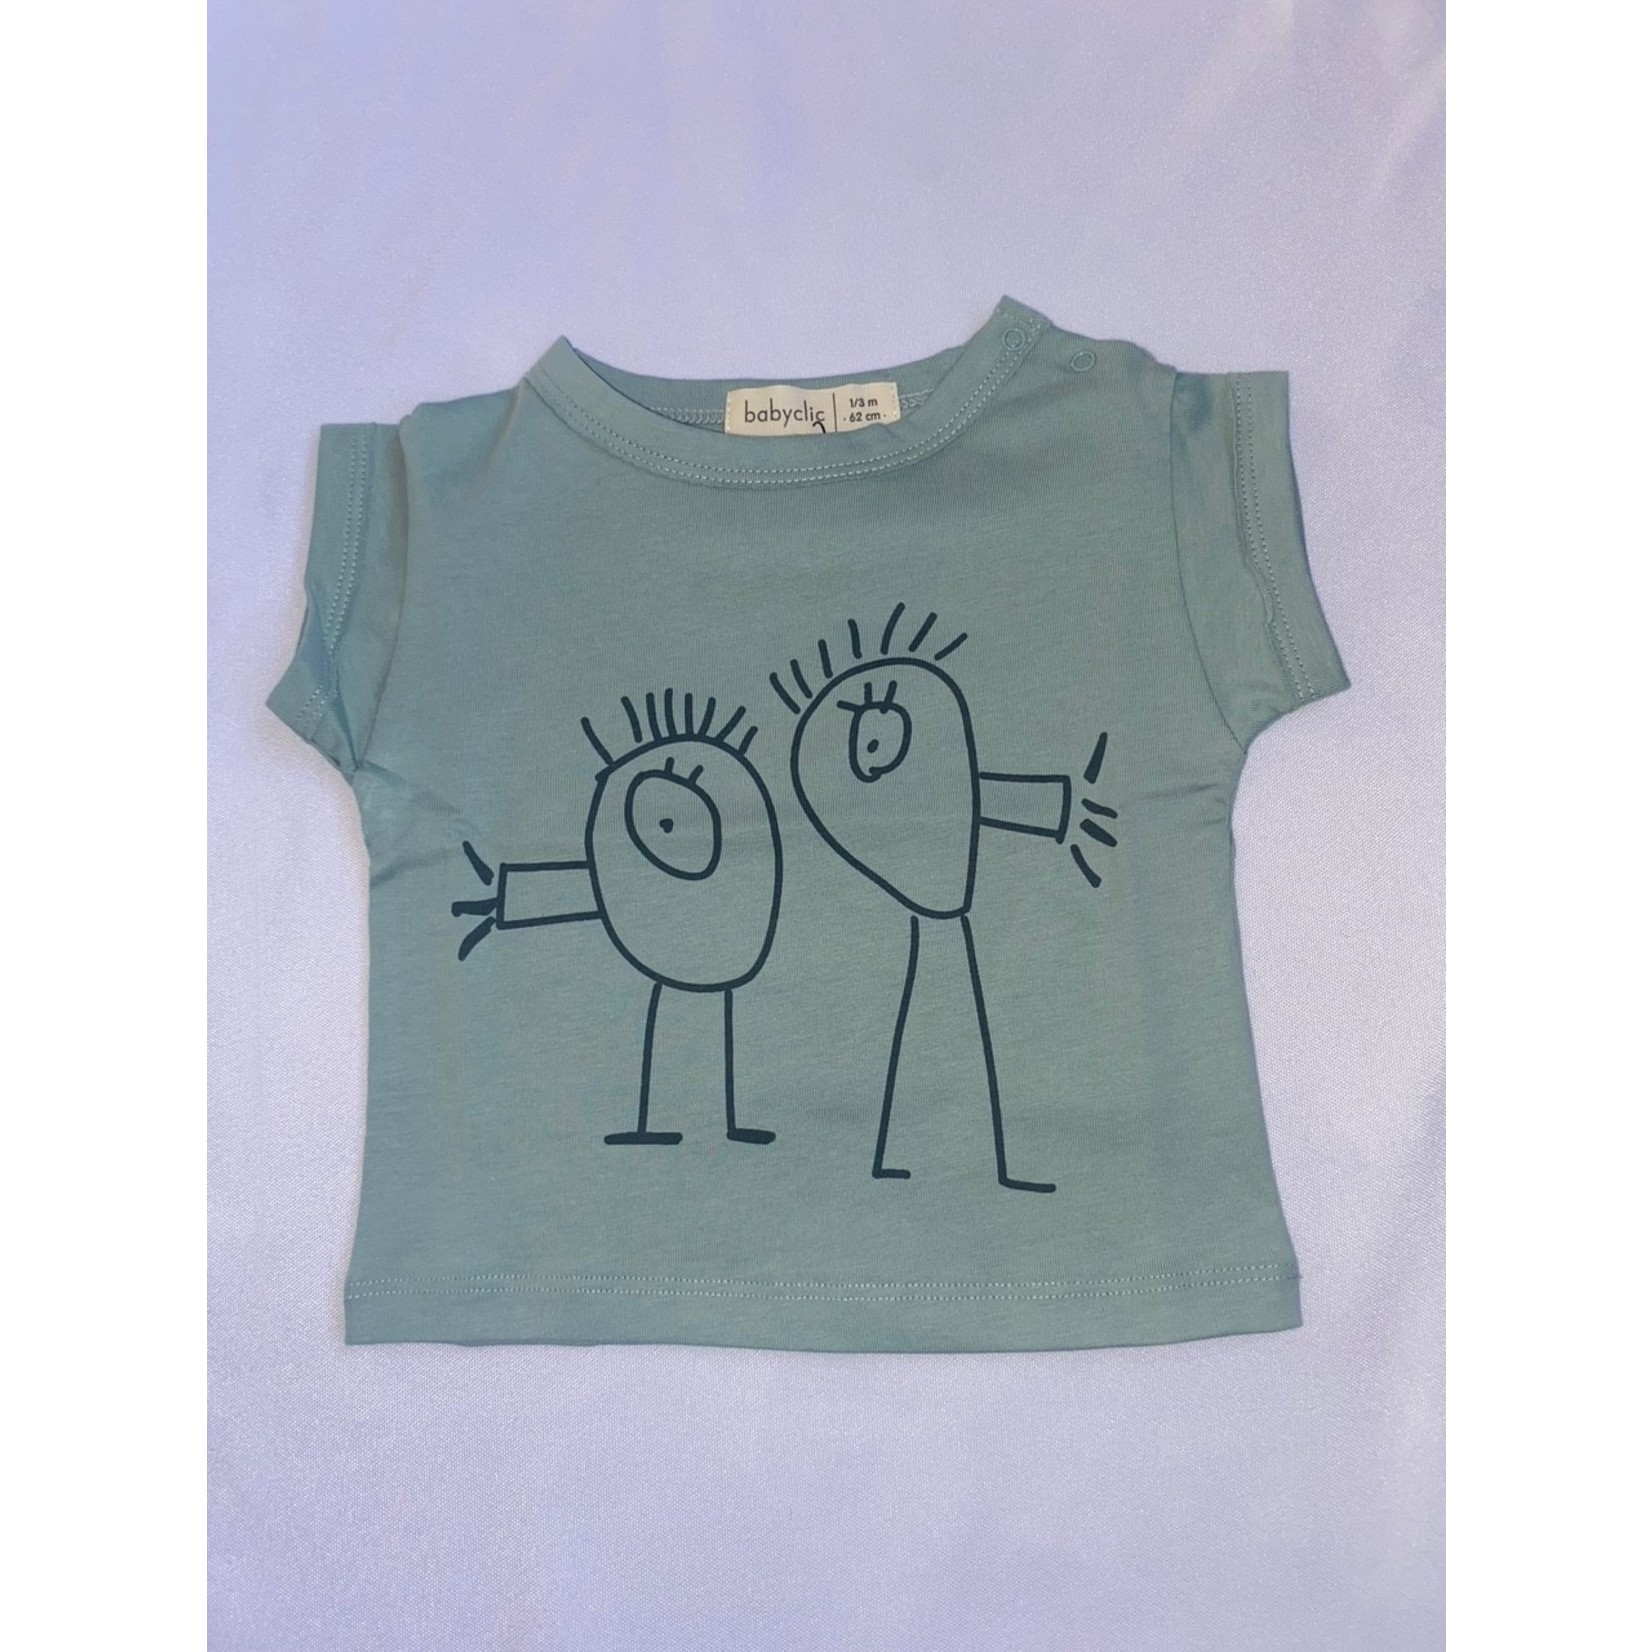 Baby Clic Baby Clic Spaces Friends Mint T-Shirt